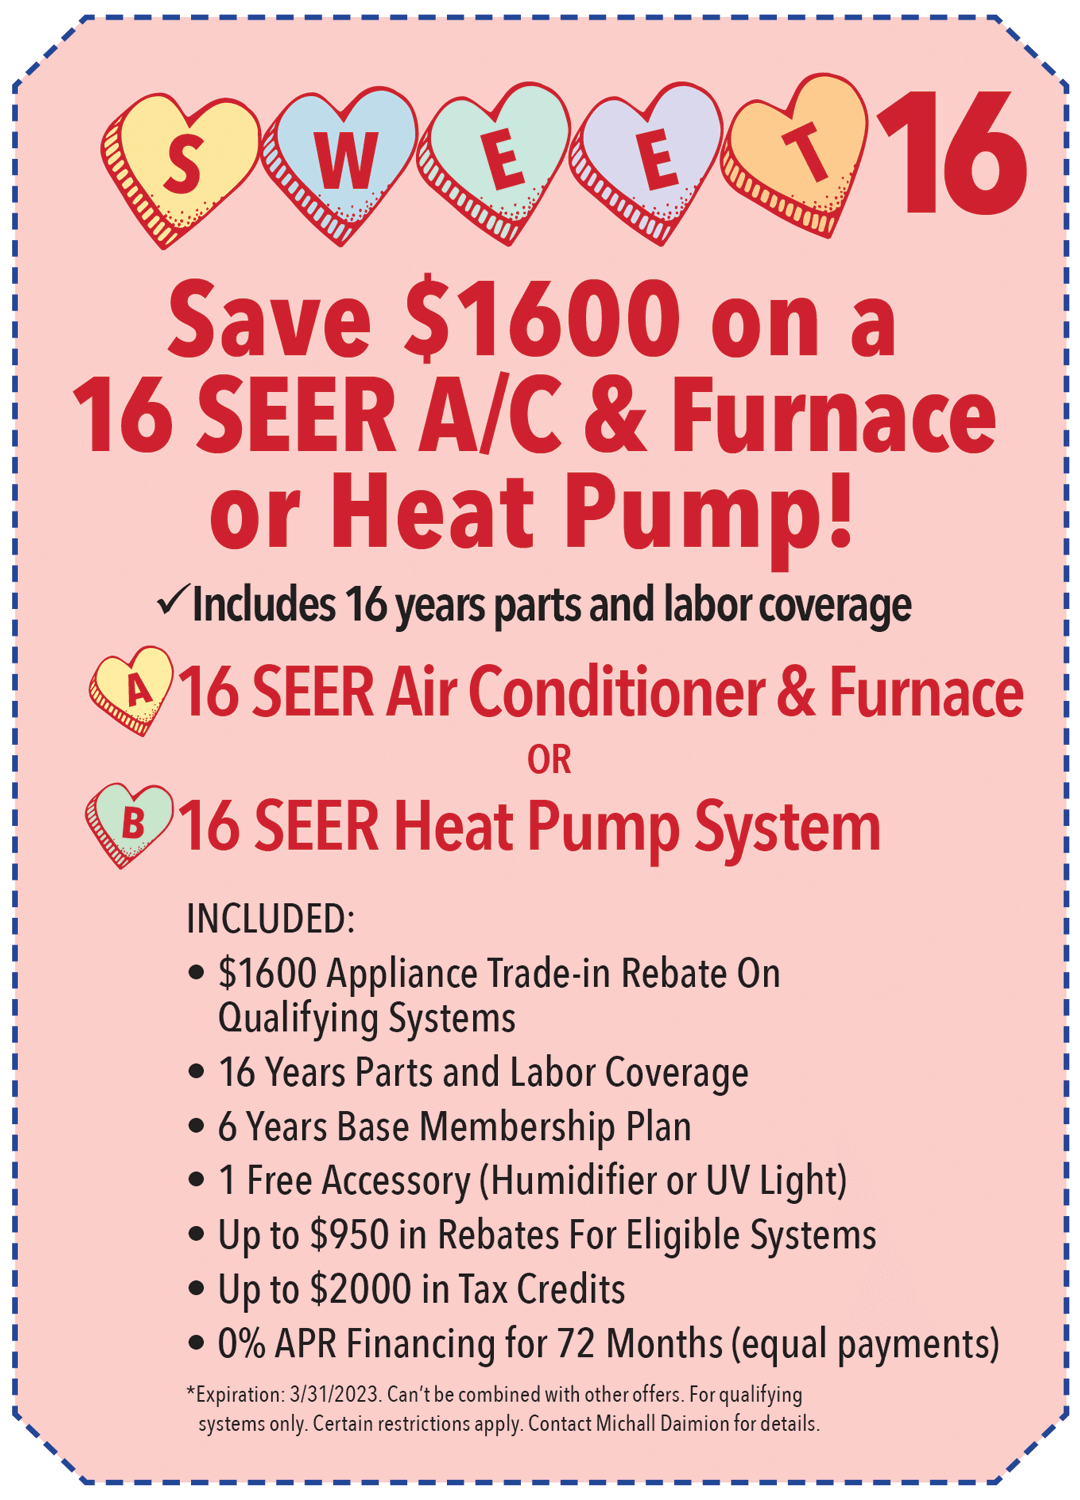 Save $1600 on a 16 SEER A/C & Furnace or Heat Pump!